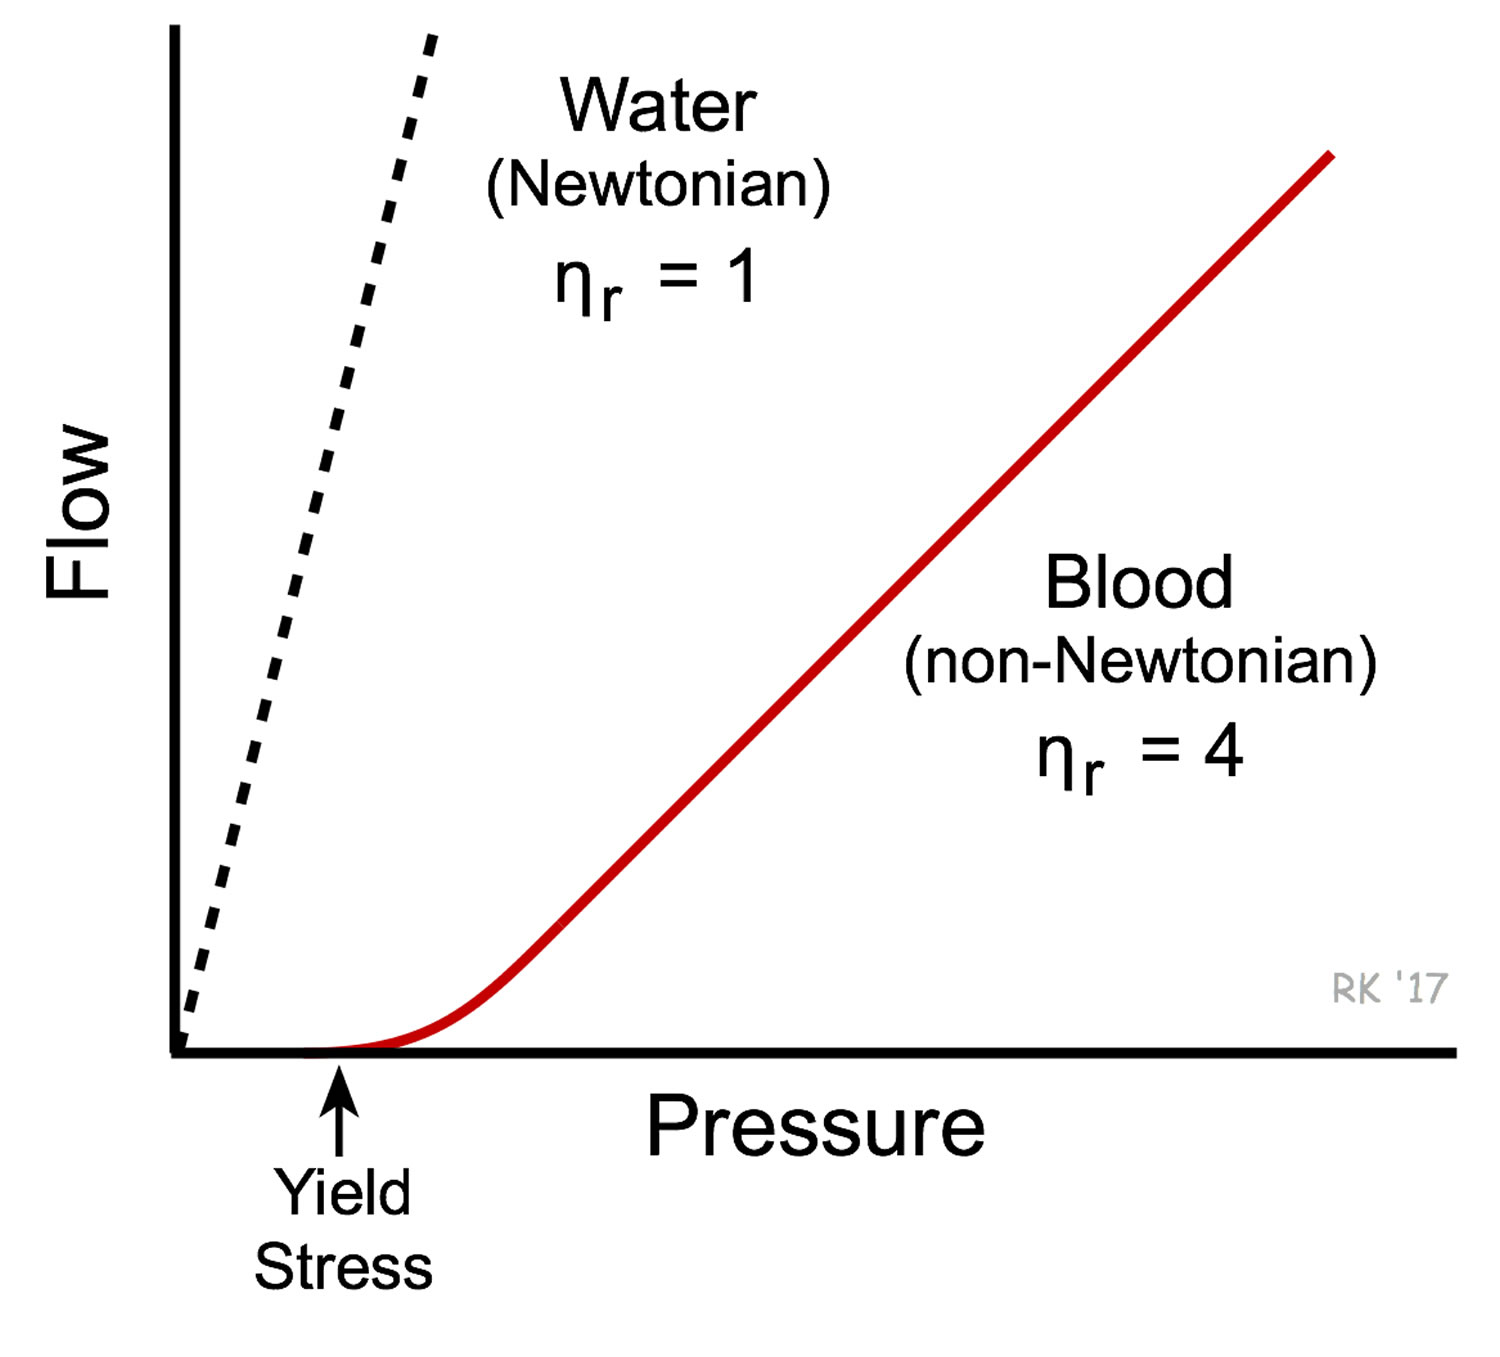 greater viscosity and lower viscosity examples